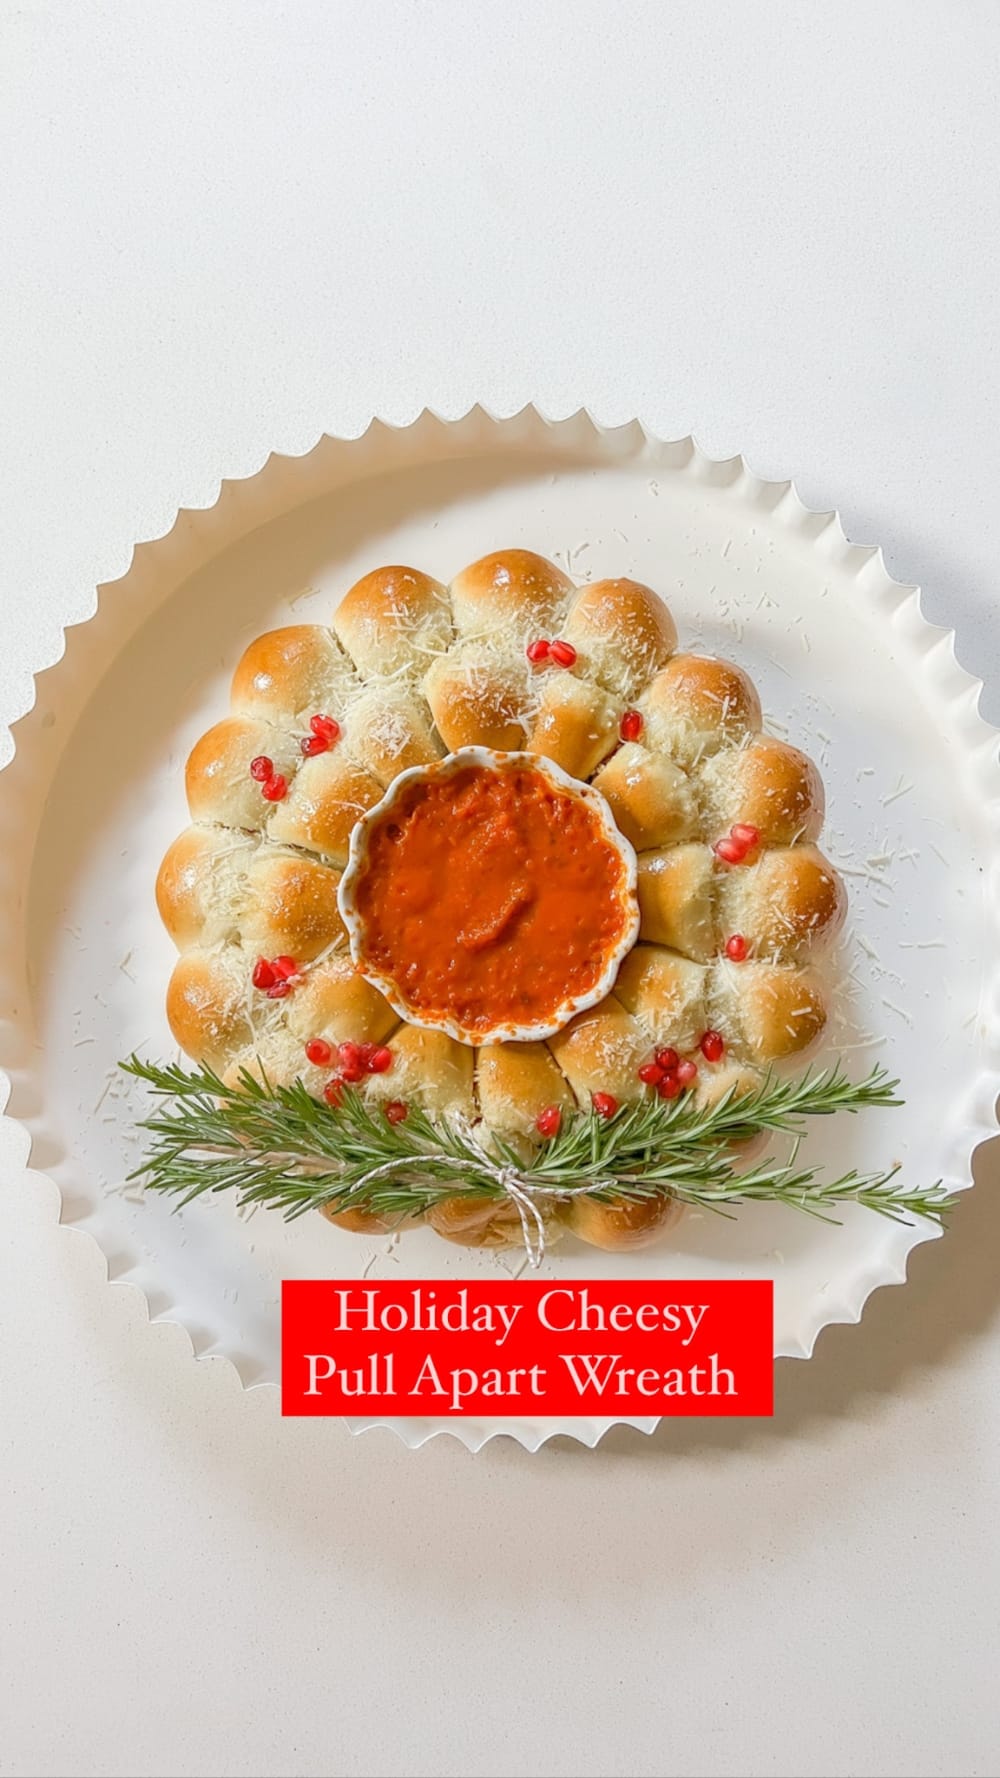 Holiday Cheesy Pull-Apart Bread Wreath. Golden rolls with a cheesy filling a perfect appetizer for holiday parties or for a night at home.